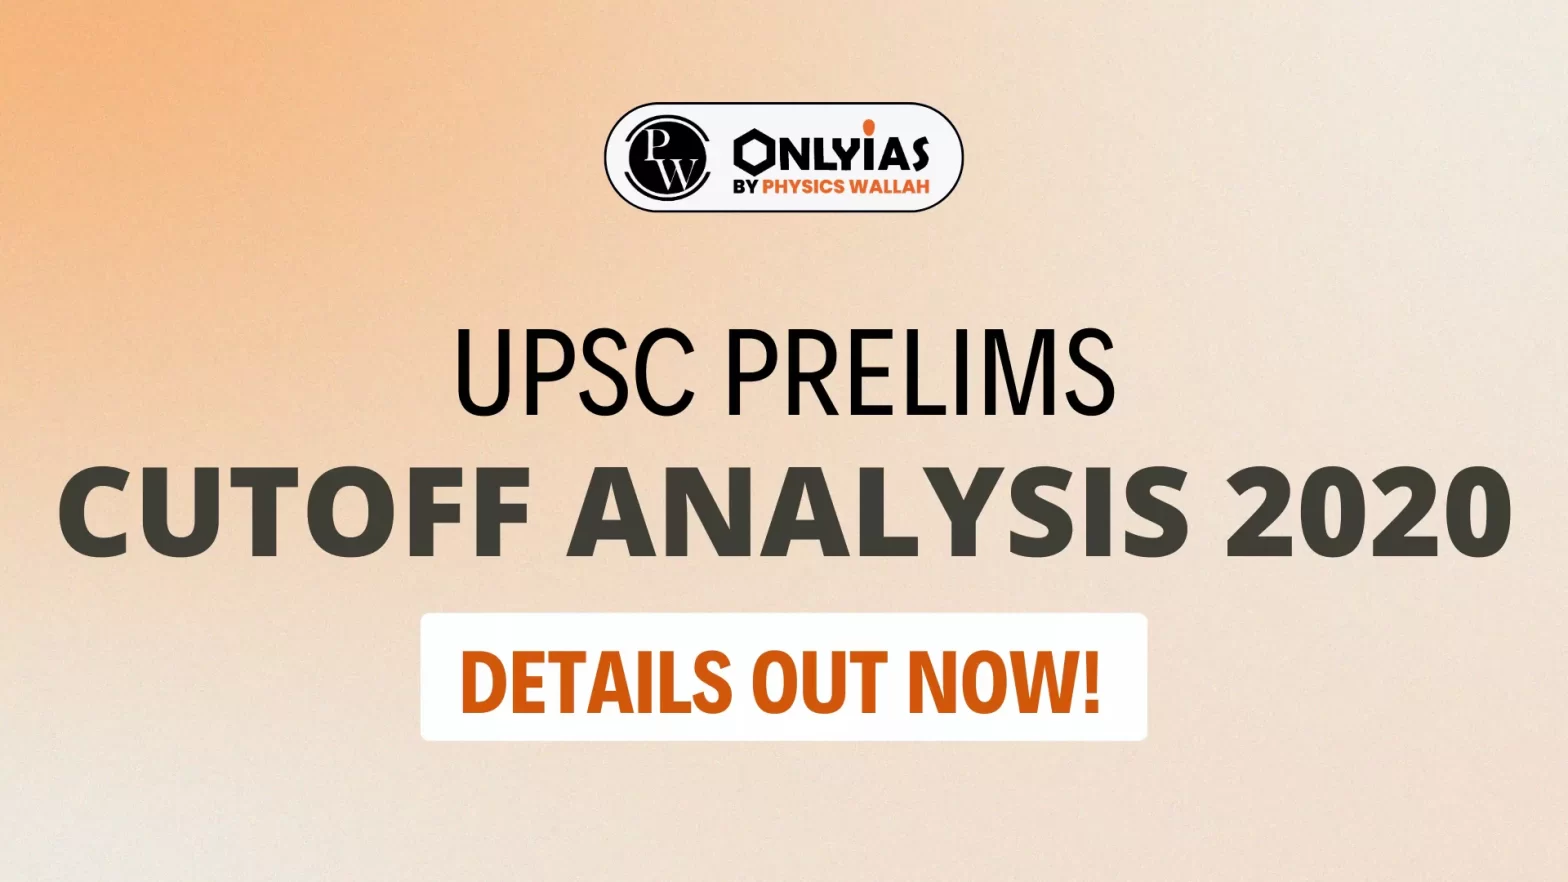 UPSC Prelims Cutoff Analysis 2020, Details Out Now!